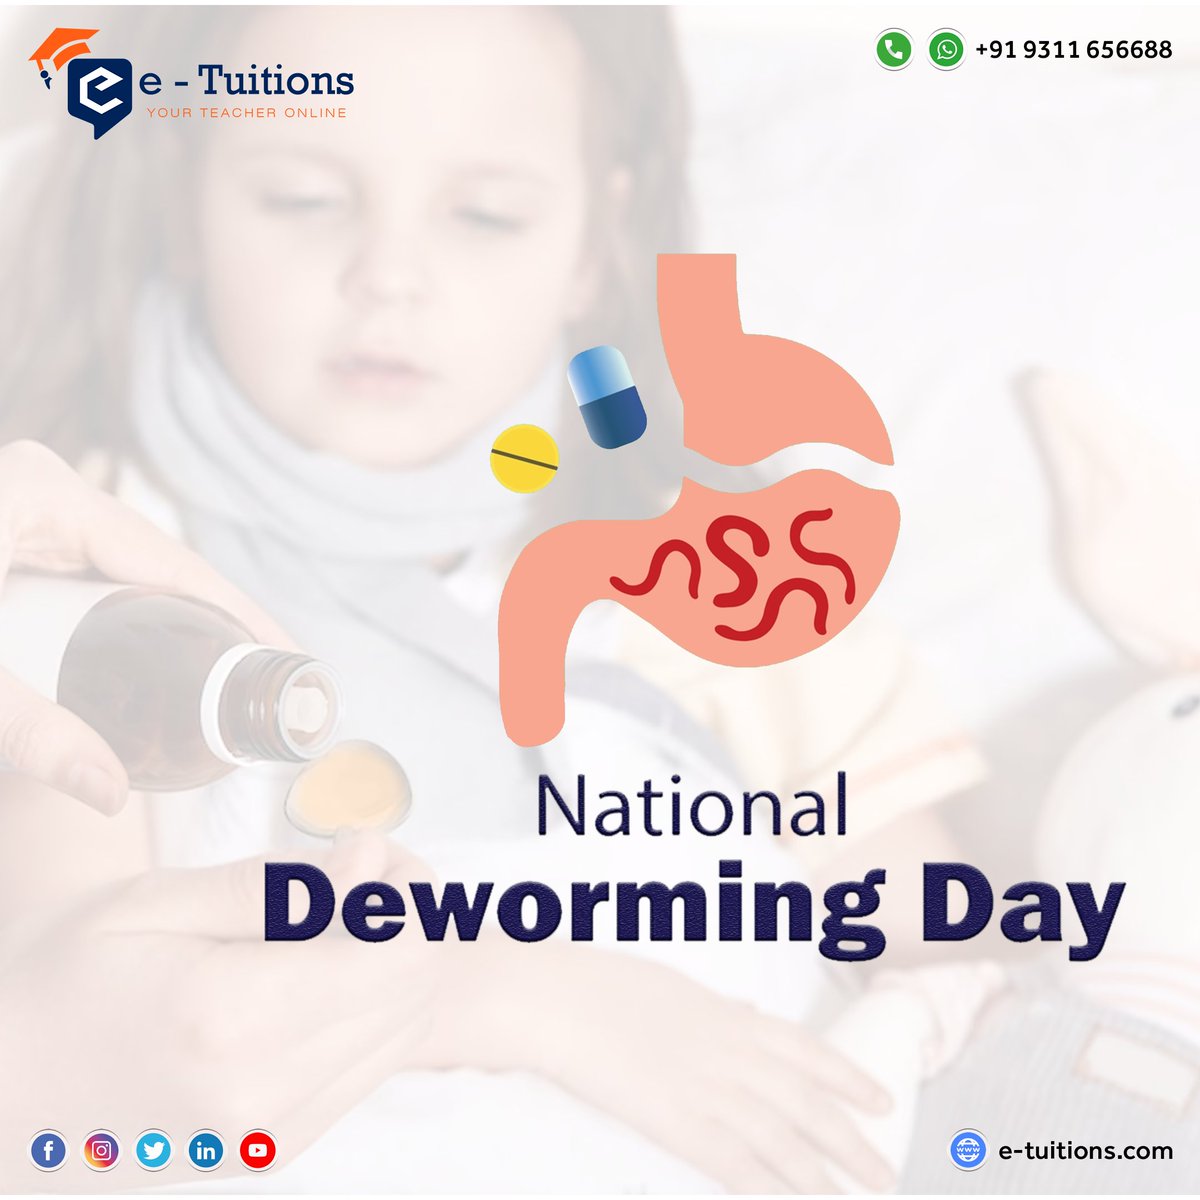 Let's raise awareness and promote the importance of deworming this #NationalDewormingDay. Join the fight against parasitic worms, and protect our children's health and future.
#SwasthaBharat #WormFreeIndia #deworming #WormFreeIndia #KrimiMuktBharat  #AyushmanBharatHWCs #etuitions